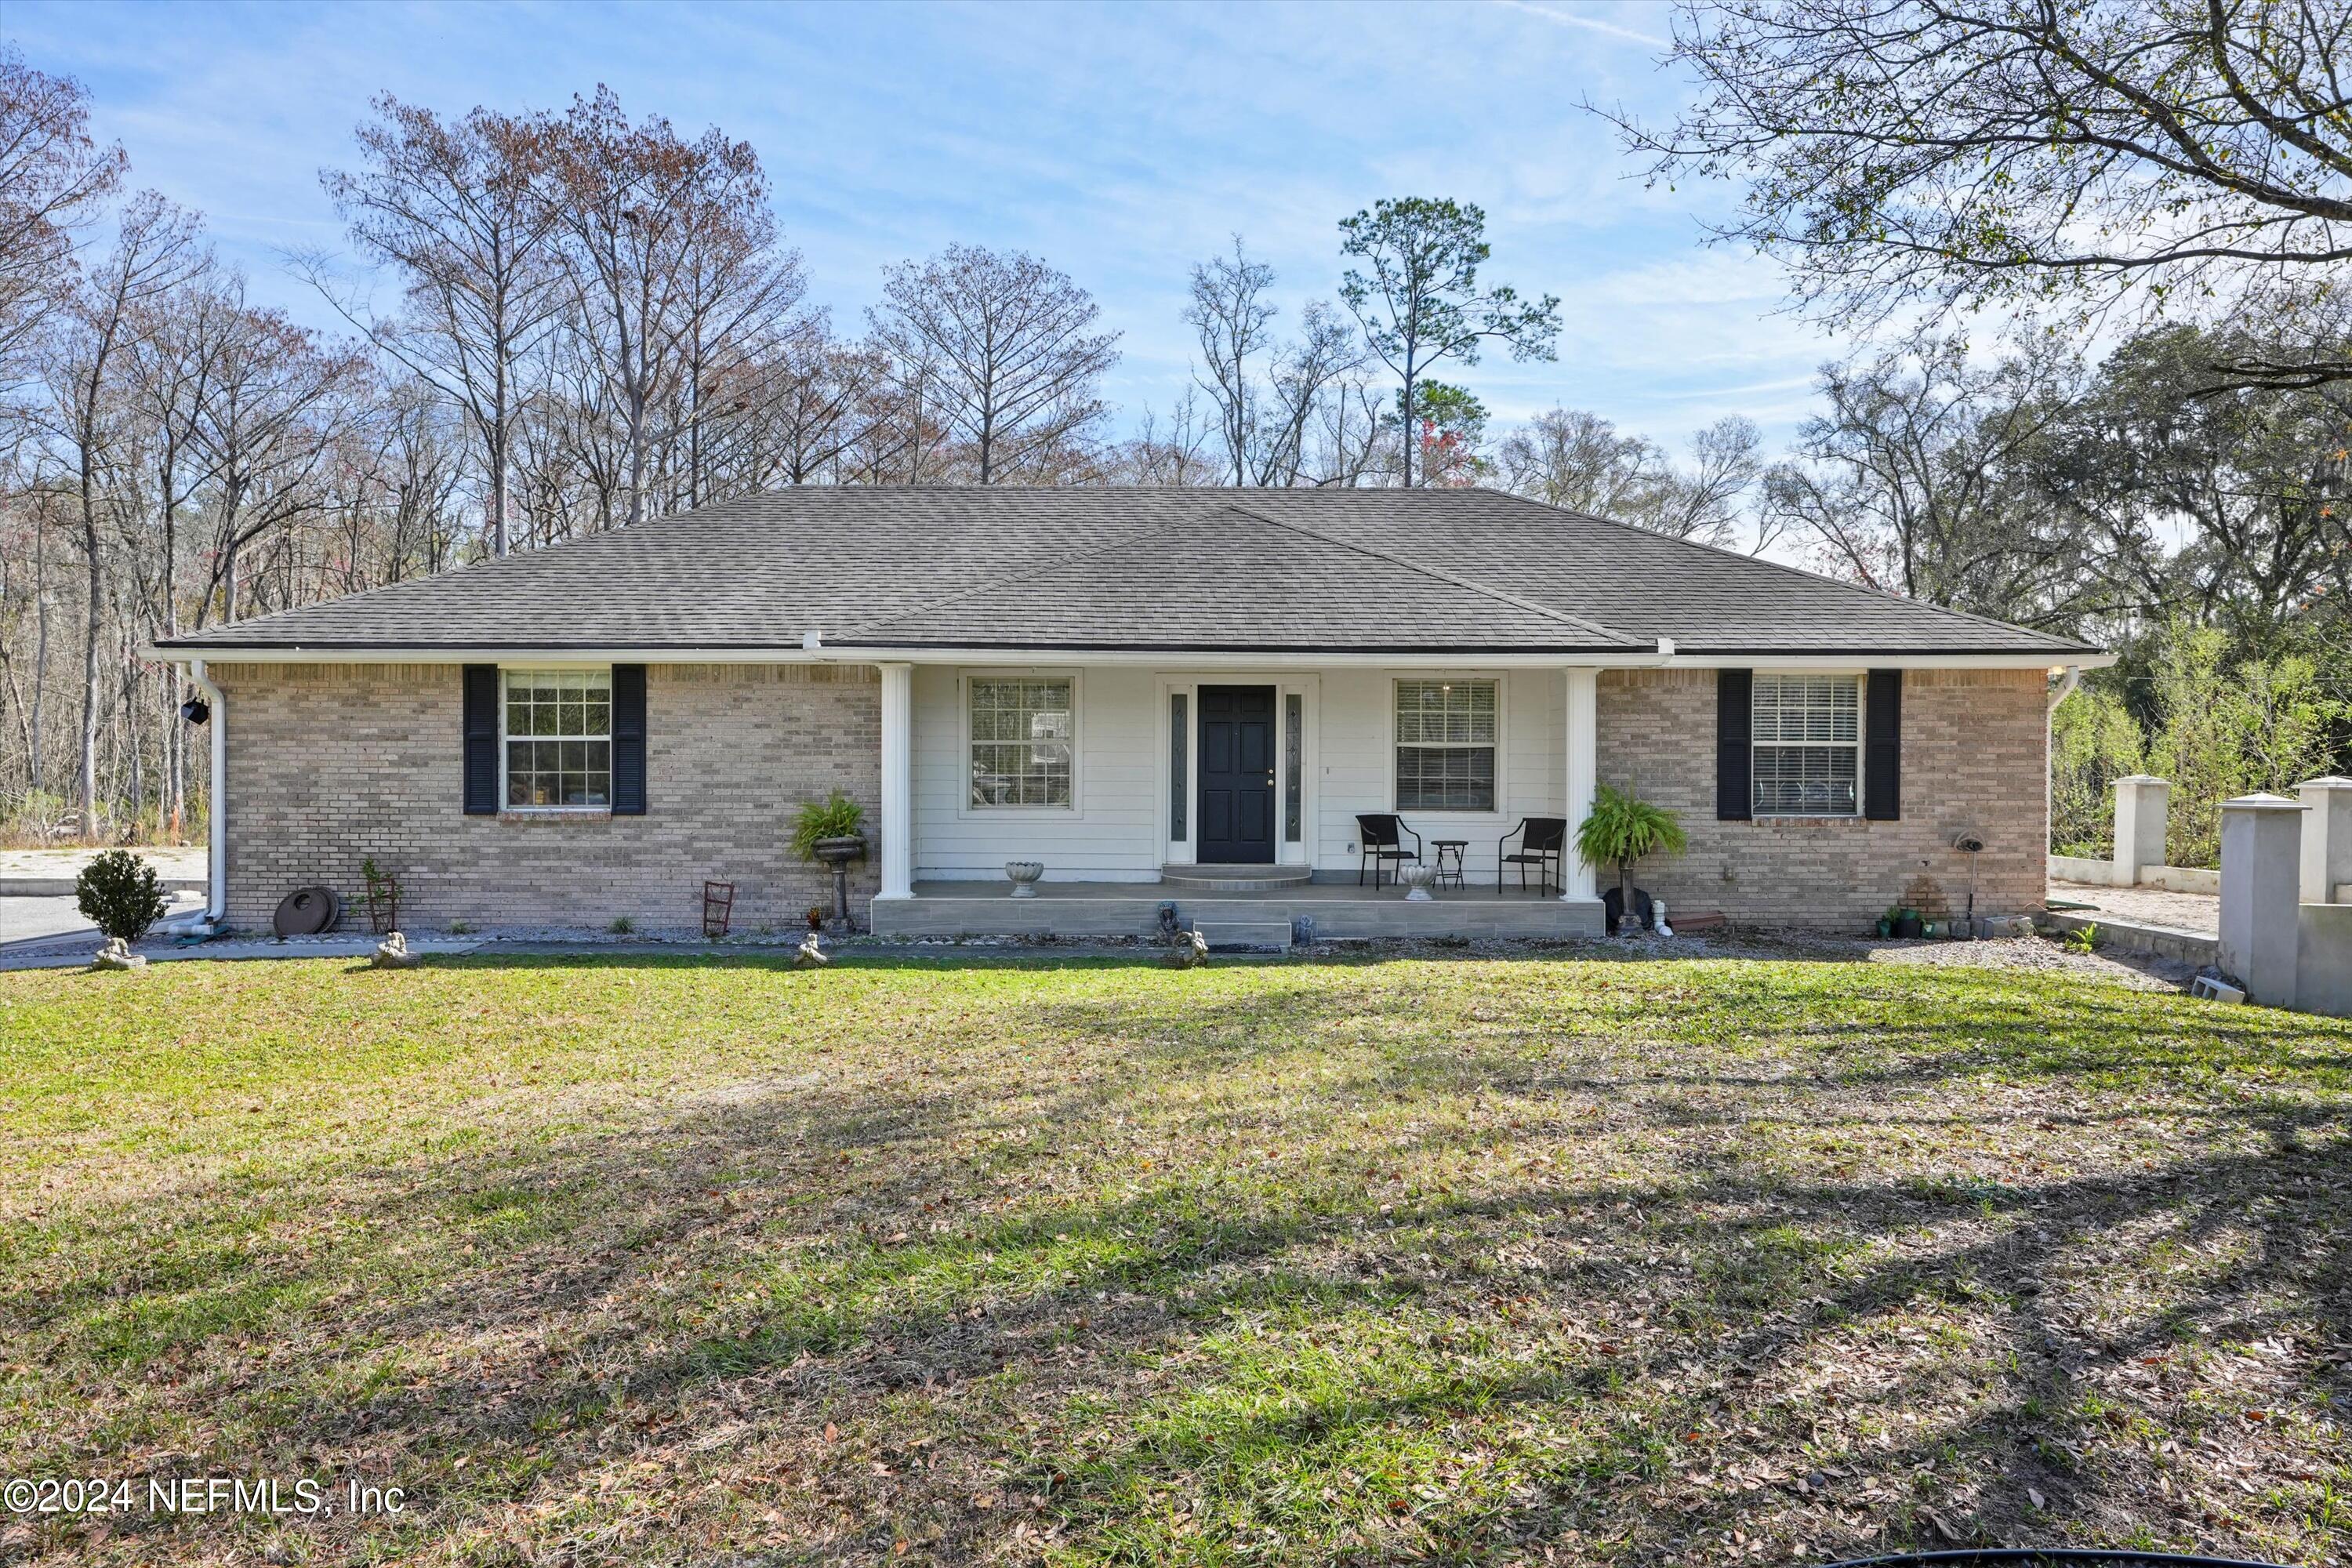 Middleburg, FL home for sale located at 721 TARA FARMS Drive, Middleburg, FL 32068